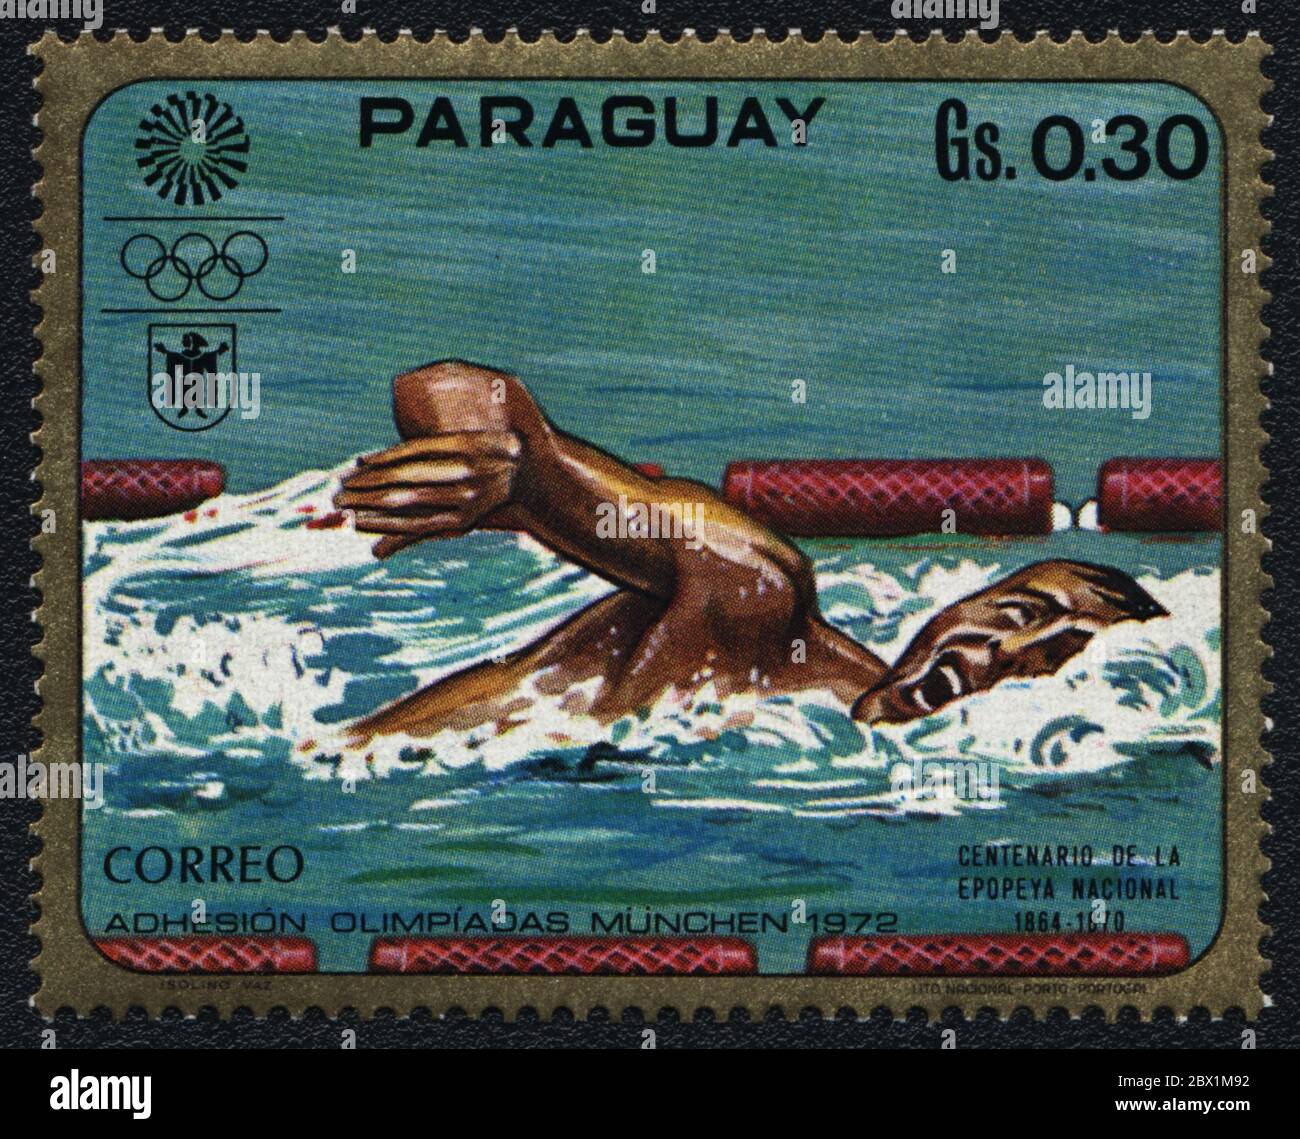 Swimming. Running hurdles. Summer Olympics Games in Munich 1972. Series: Centenary of the National Epic 1864 - 1870. Postal stamp:  Paraguay, 1972 Stock Photo